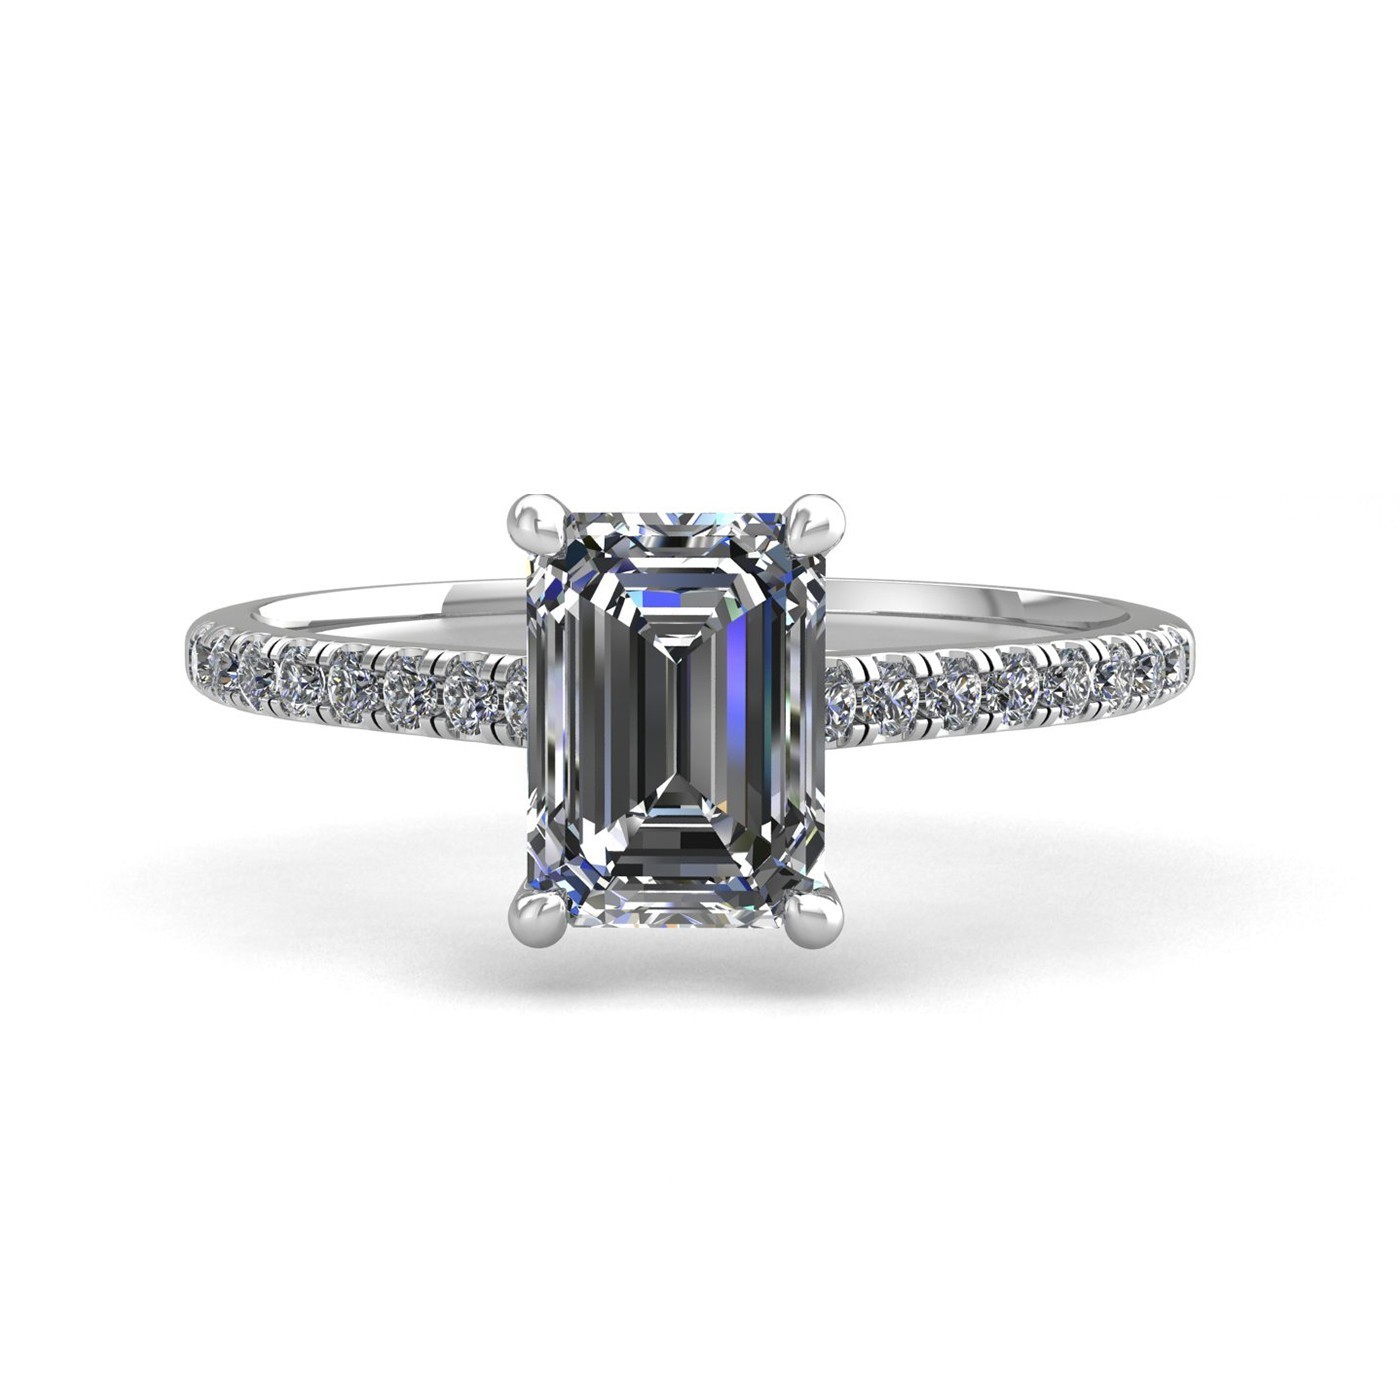 18k white gold 1.0ct 4 prongs emerald cut diamond engagement ring with whisper thin pavÉ set band